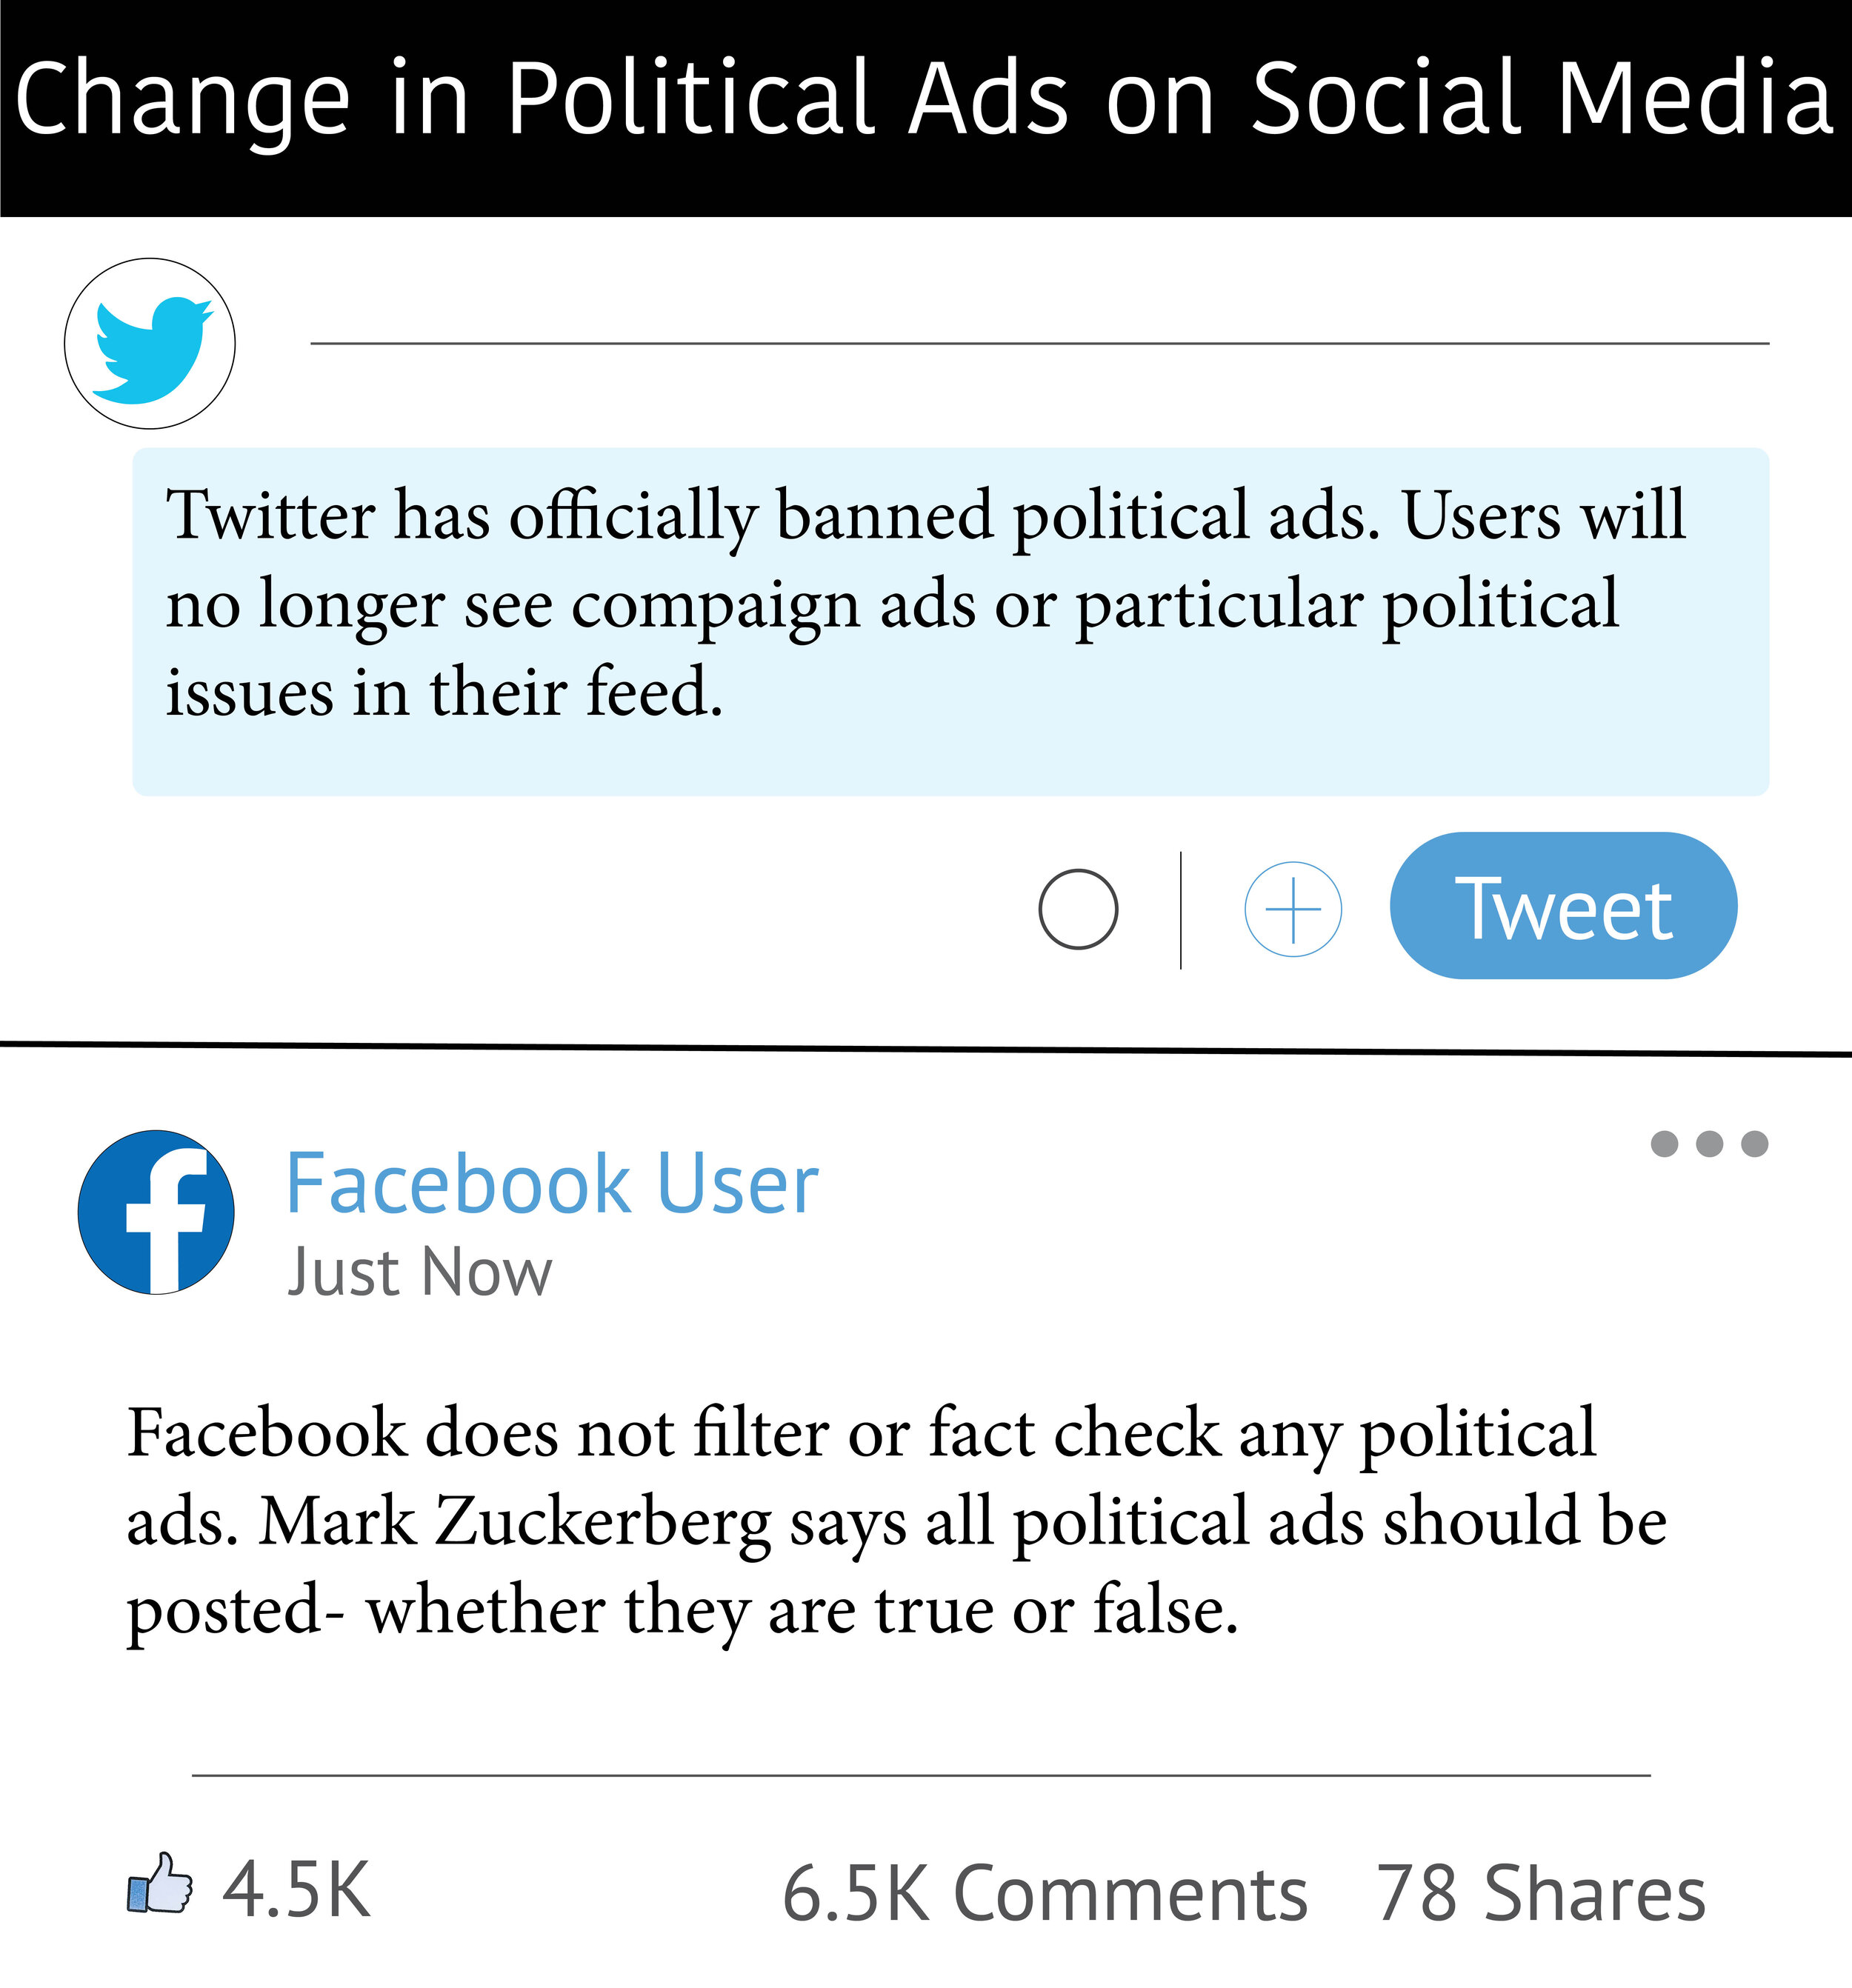 Twitter decides to ban all political ads. Facebook, on the other hand, allows any type of political advertisements to be posted on its feed.